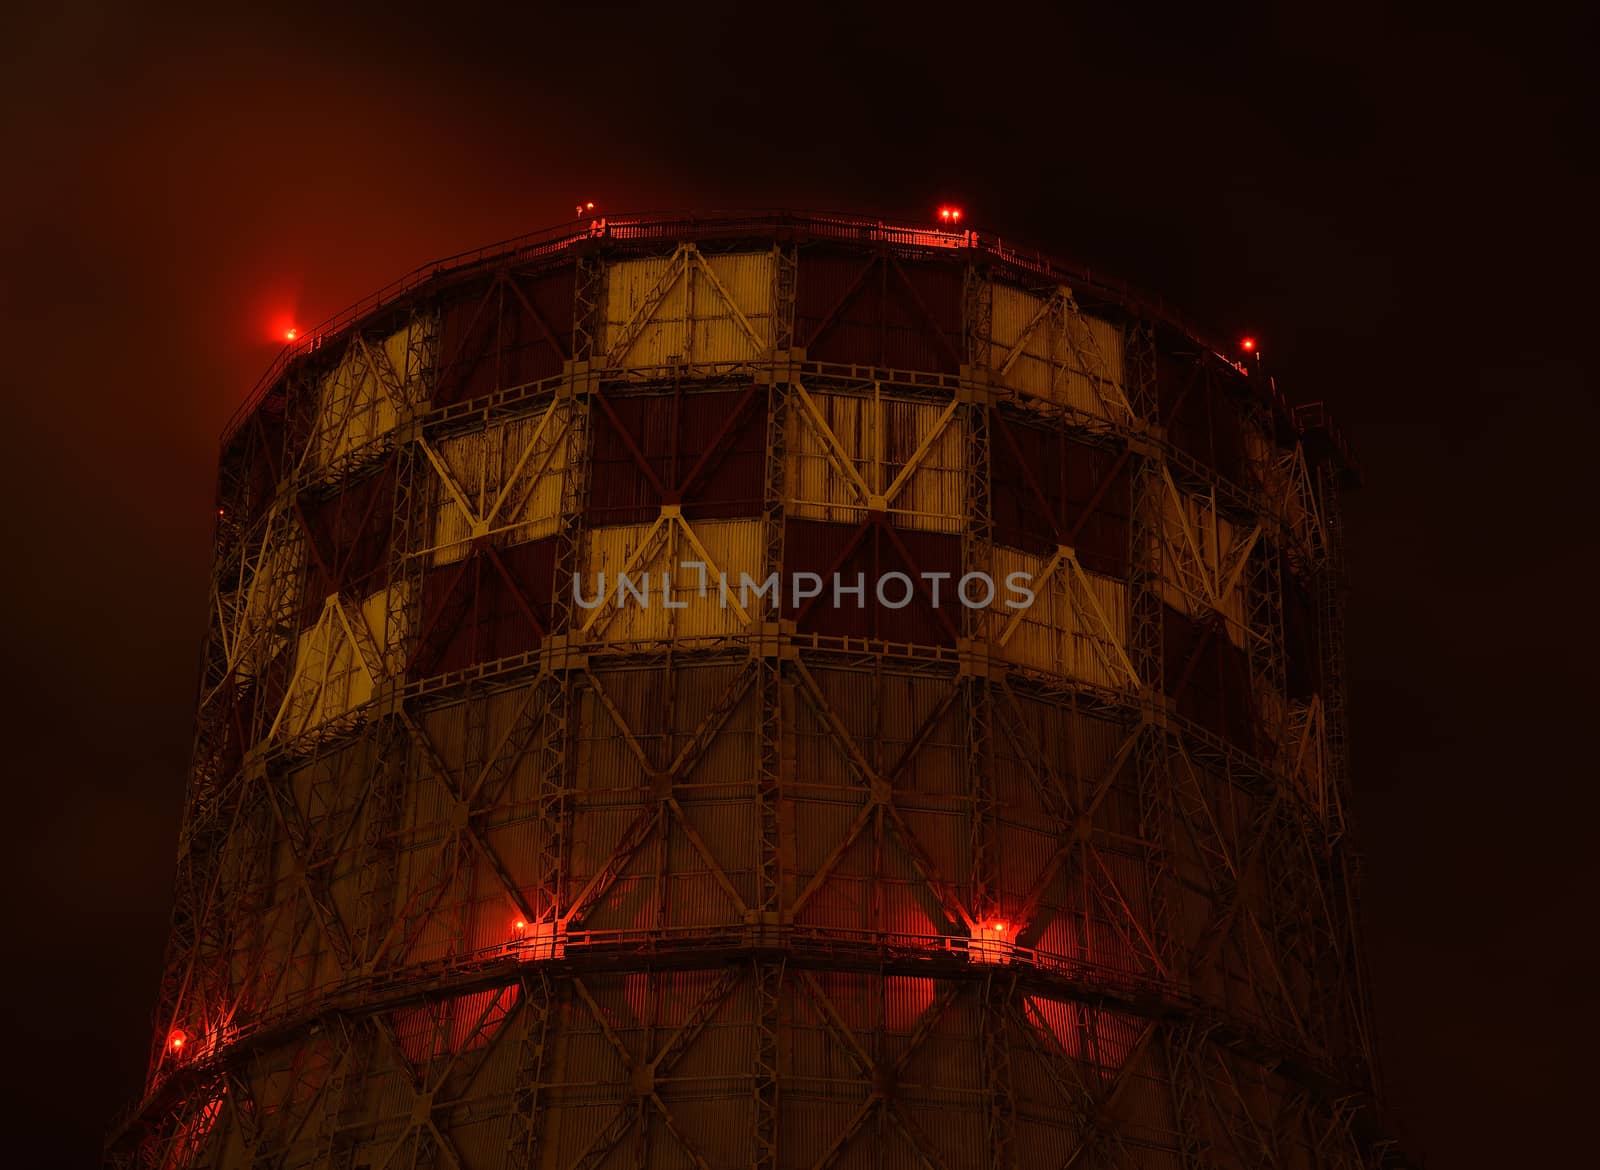 Pipe energy sector emits smoke into the atmosphere. Night view. Lights red lanterns